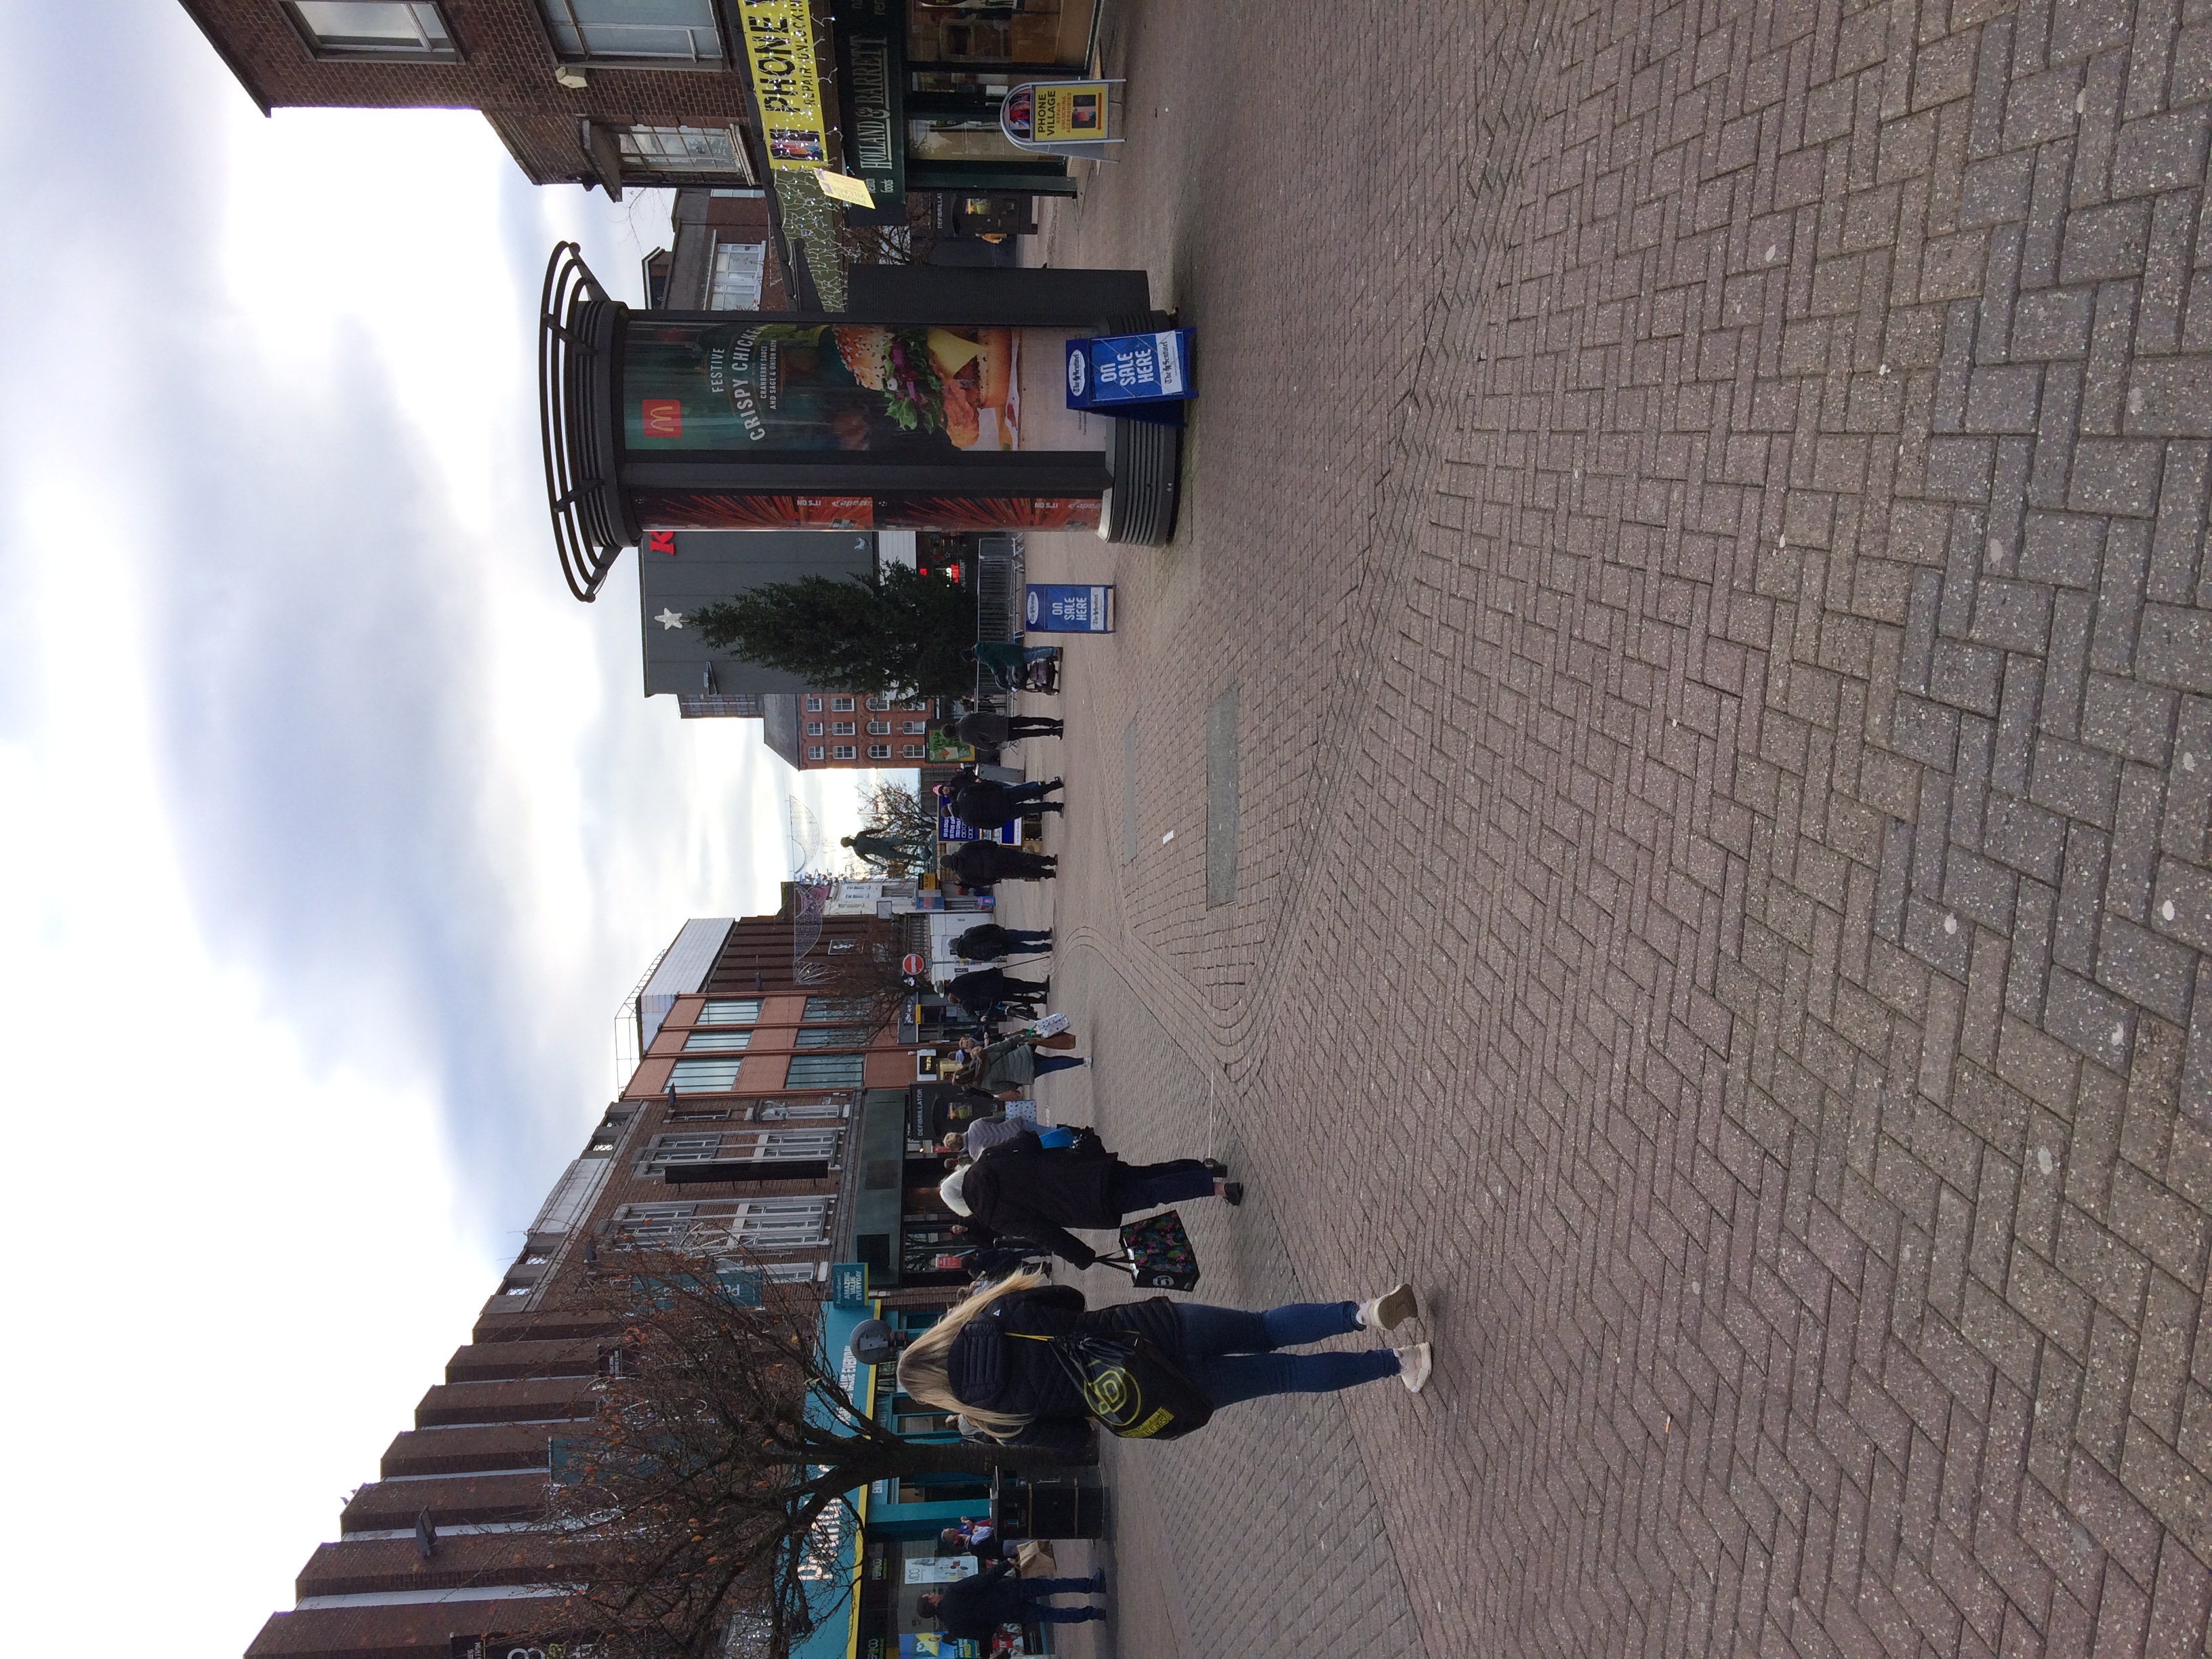 Not many people shopping in Hanley